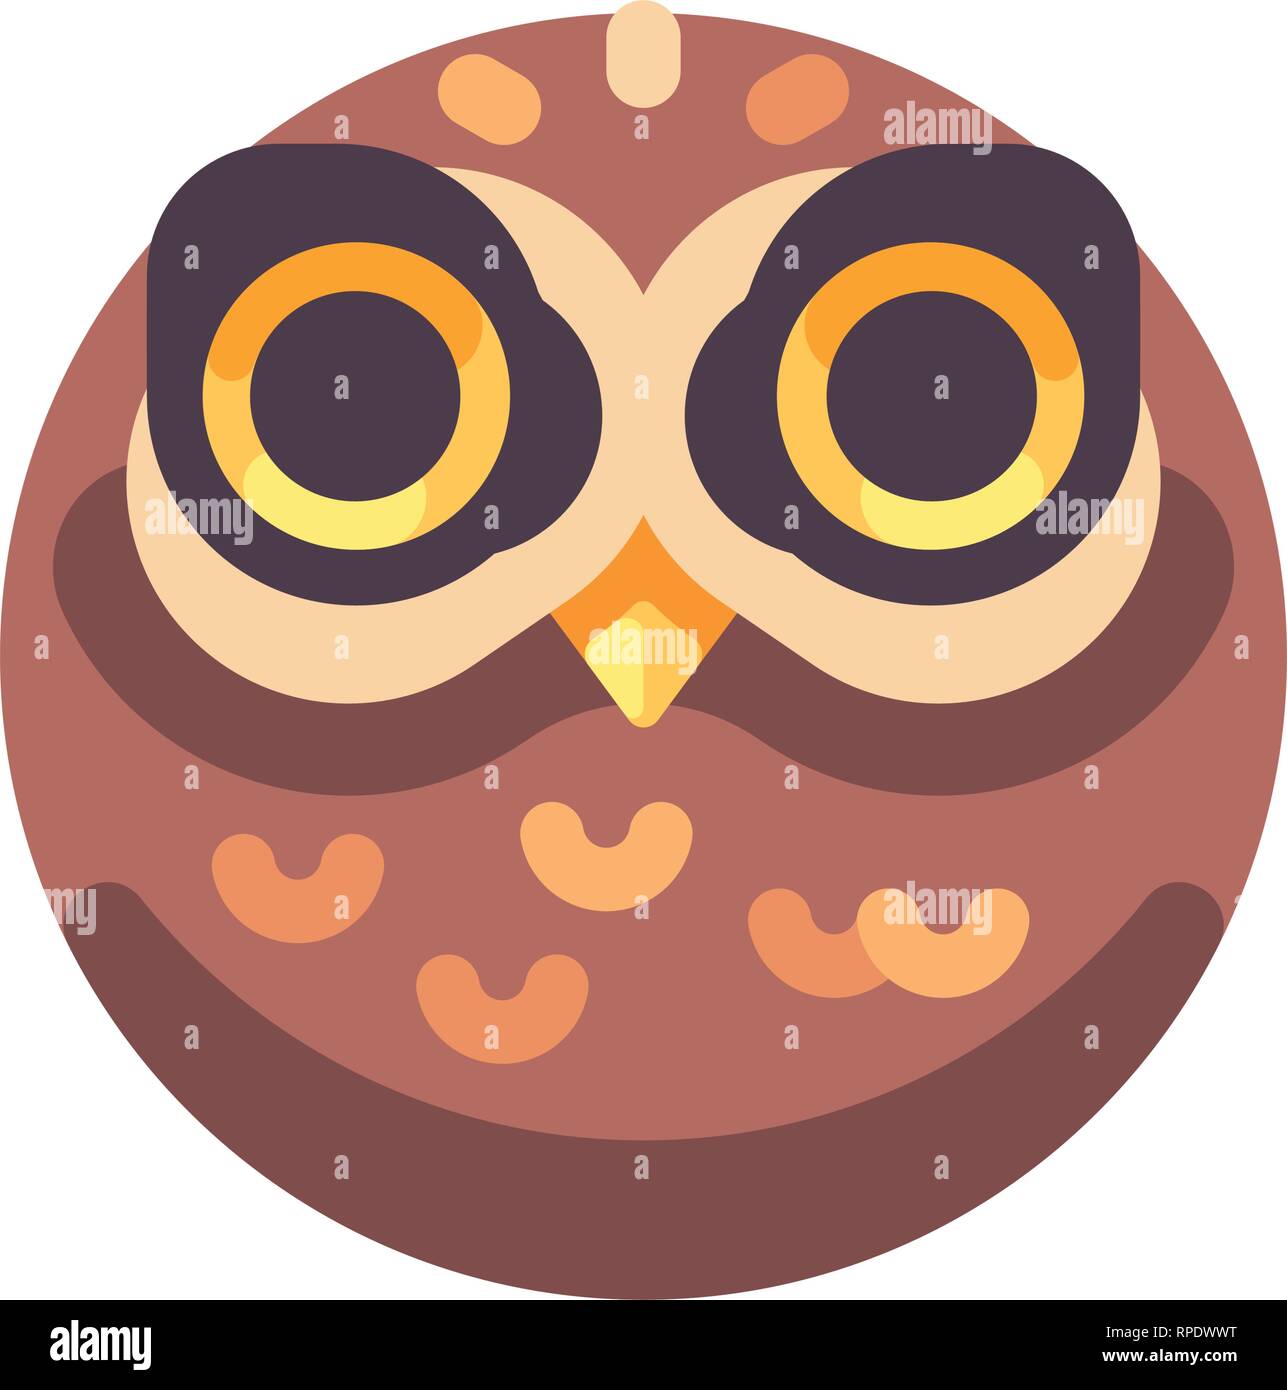 Funny scary brown owl face flat icon Stock Vector